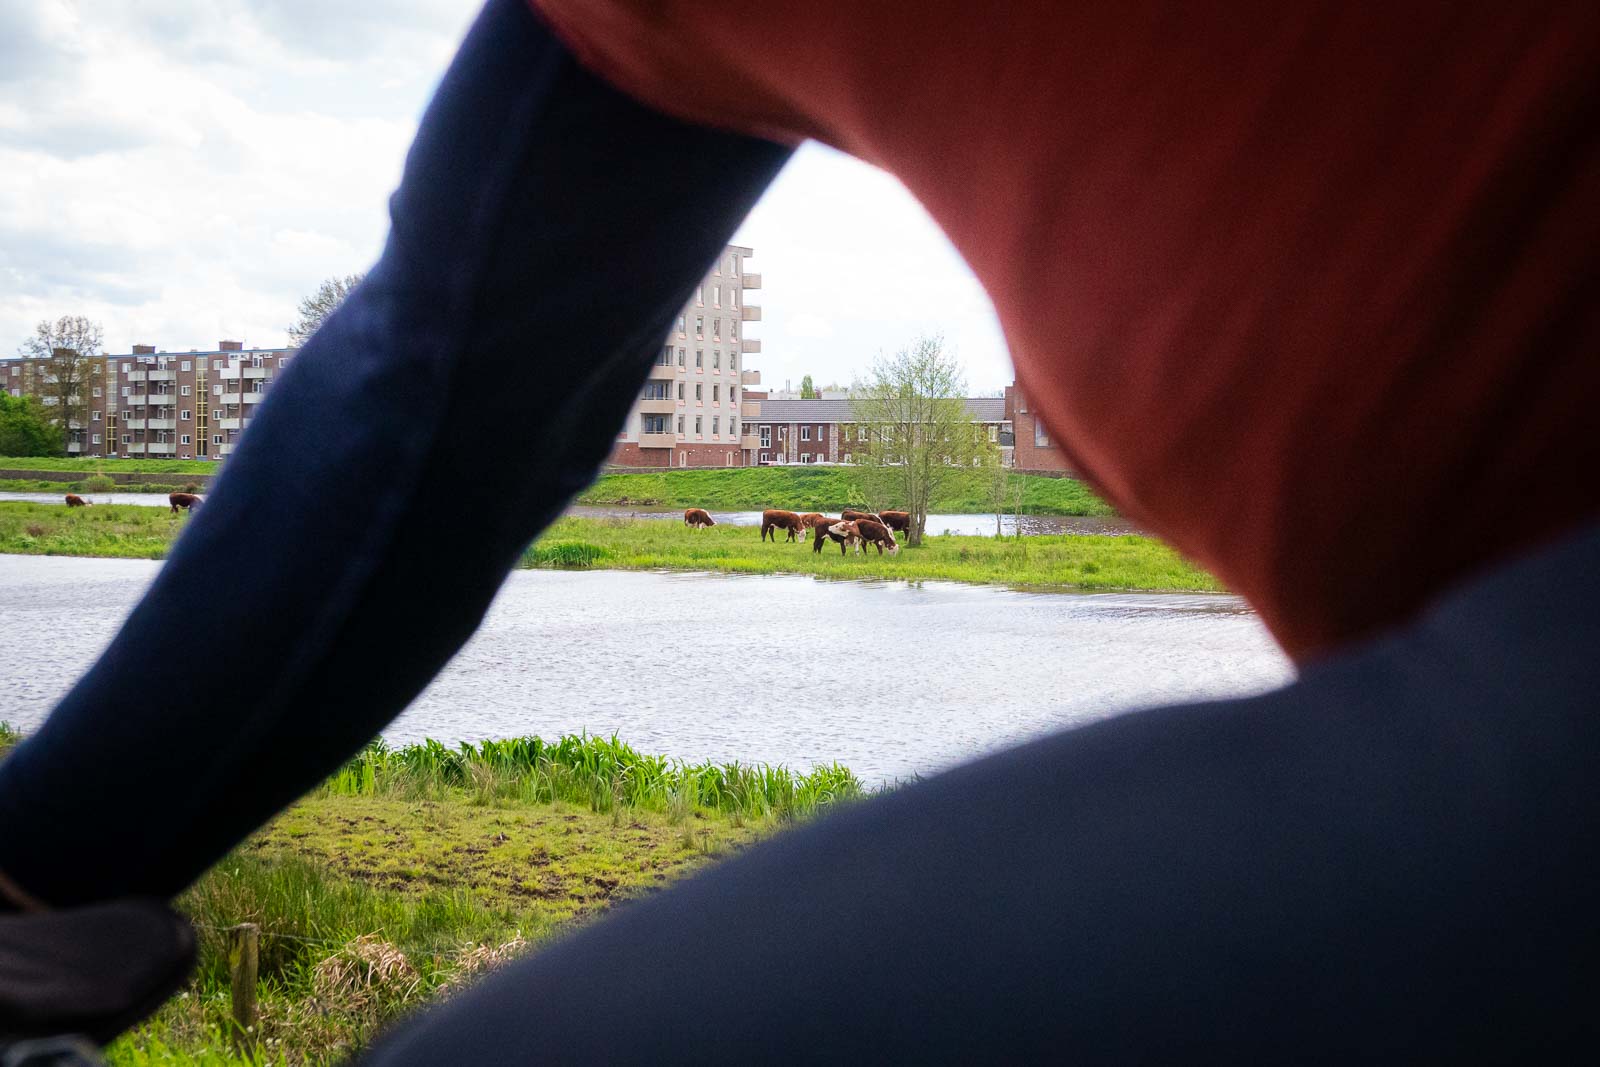 Through a cyclist you can see cows grazing on an island in front of an urban panorama